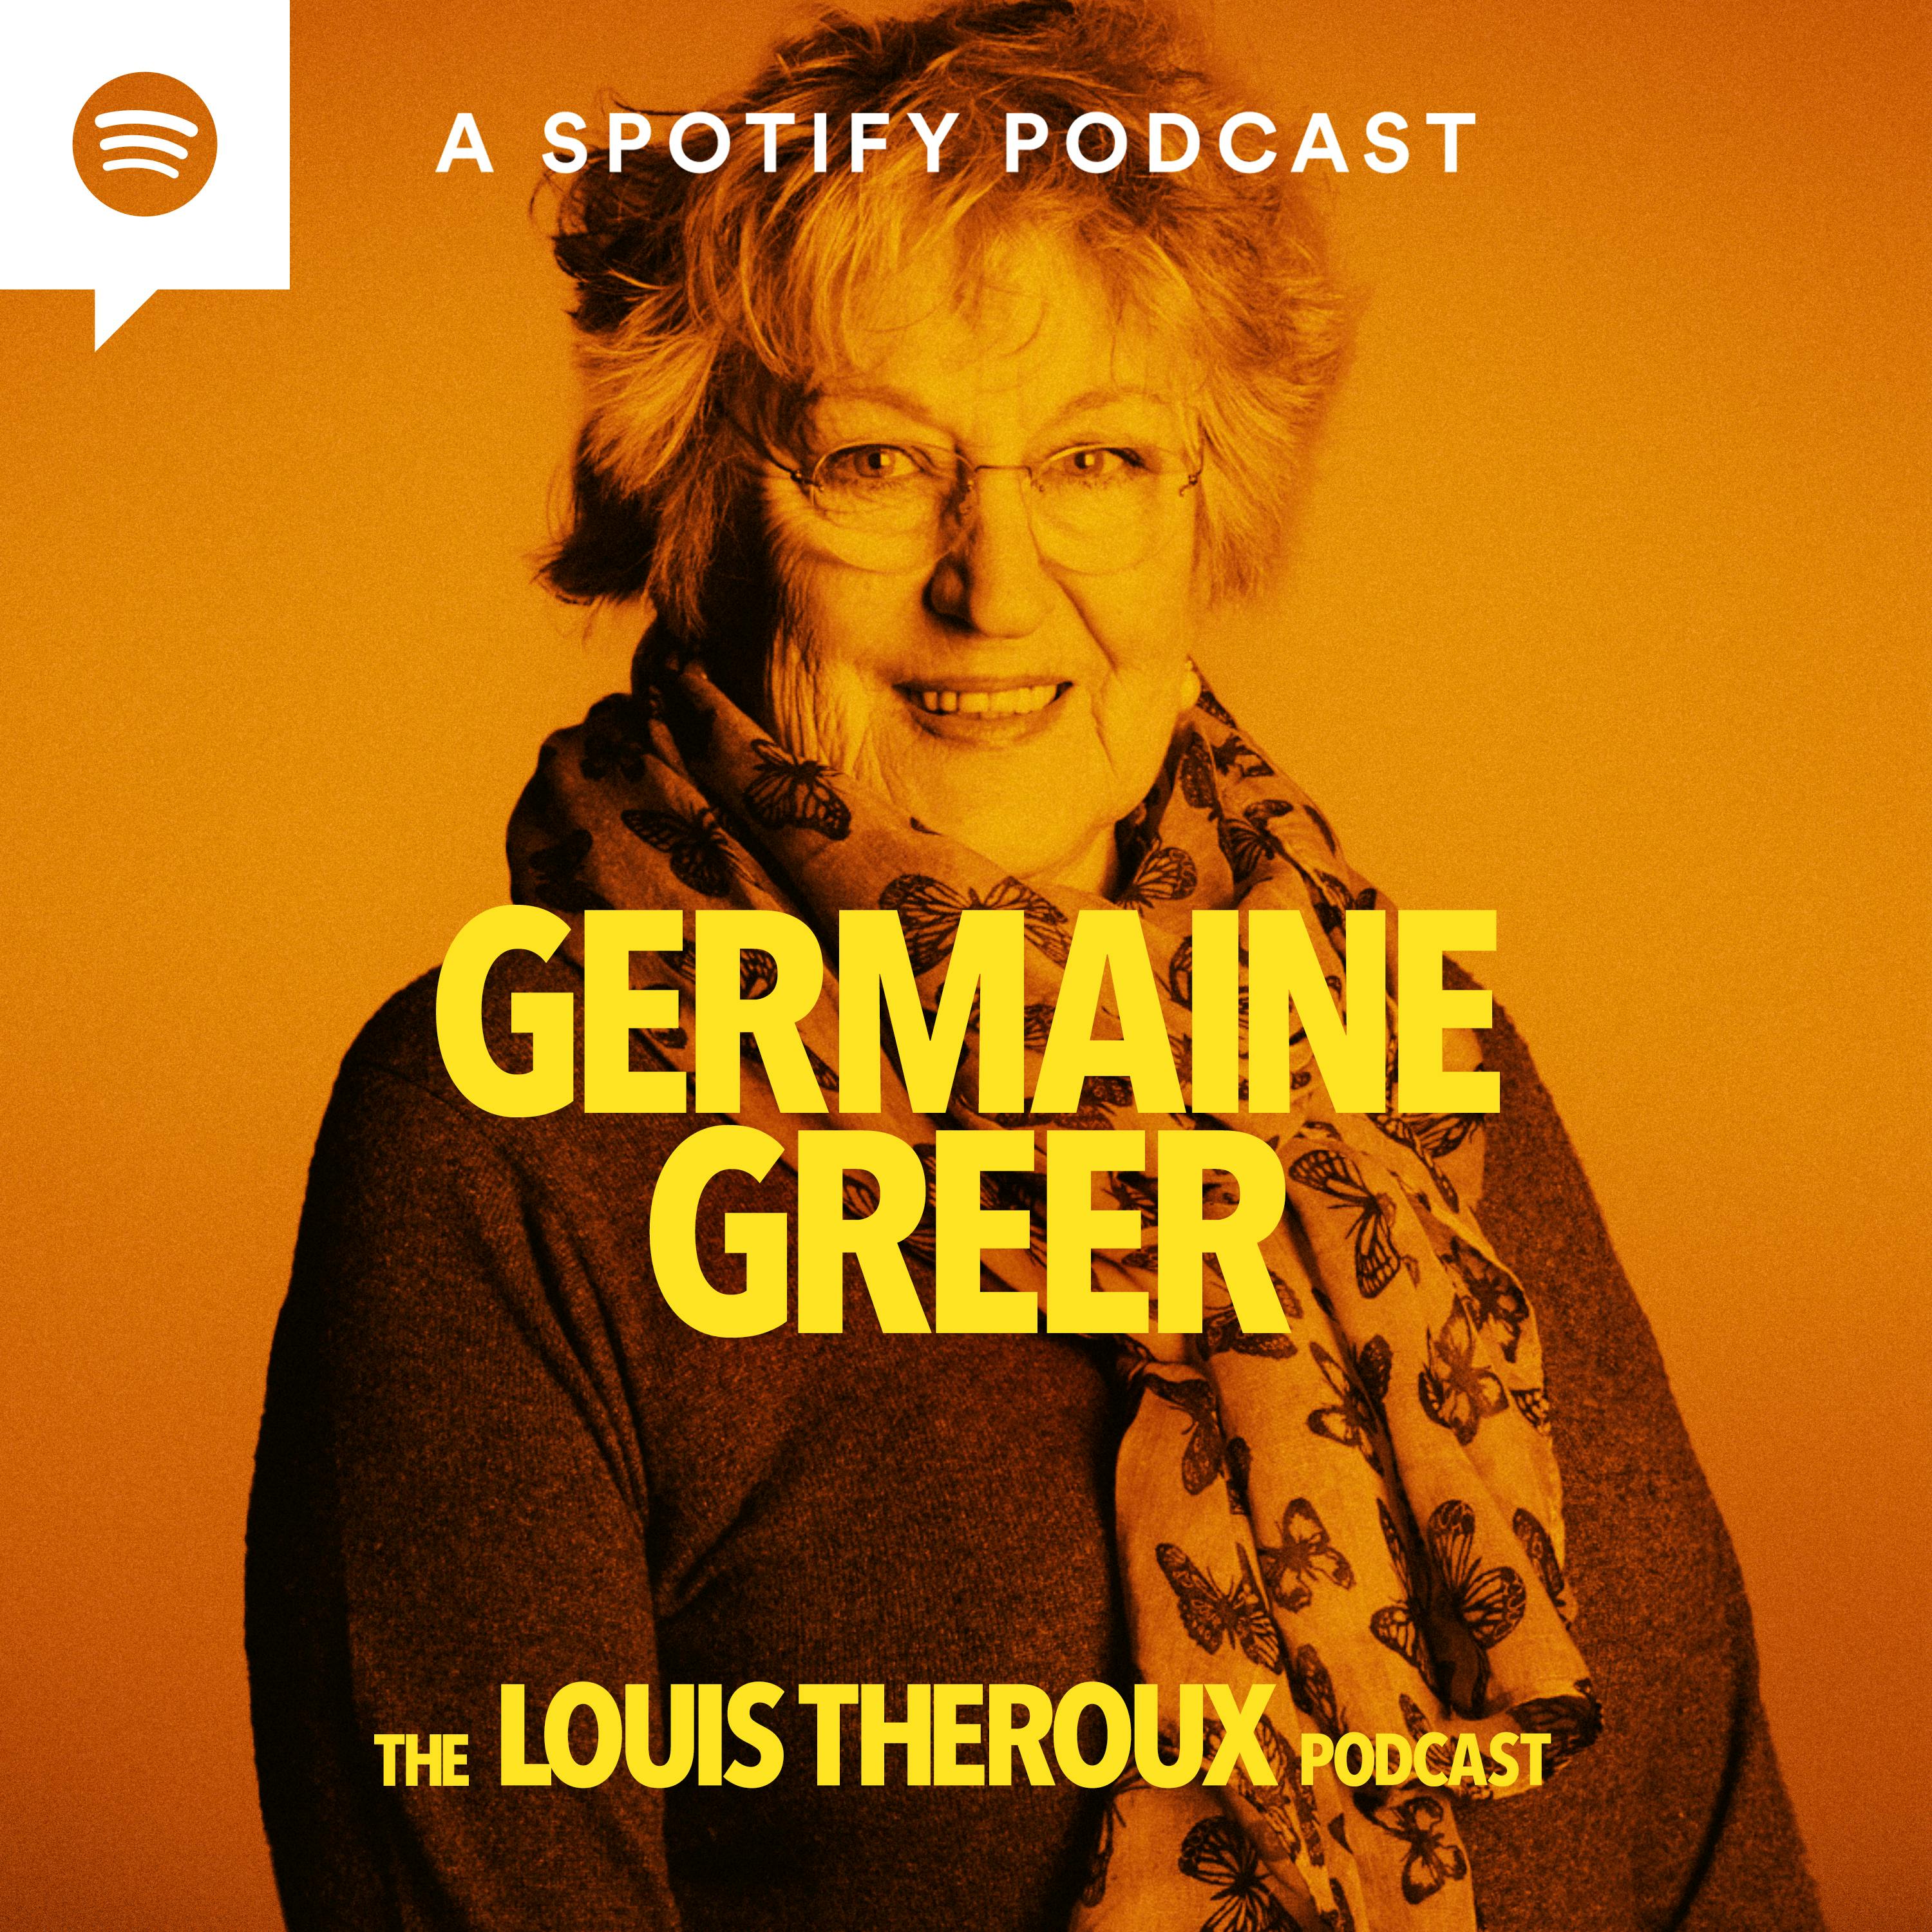 S2 EP7: Germaine Greer on her three-week long marriage, flirting with George Best, and her controversial views on gender and the MeToo movement.